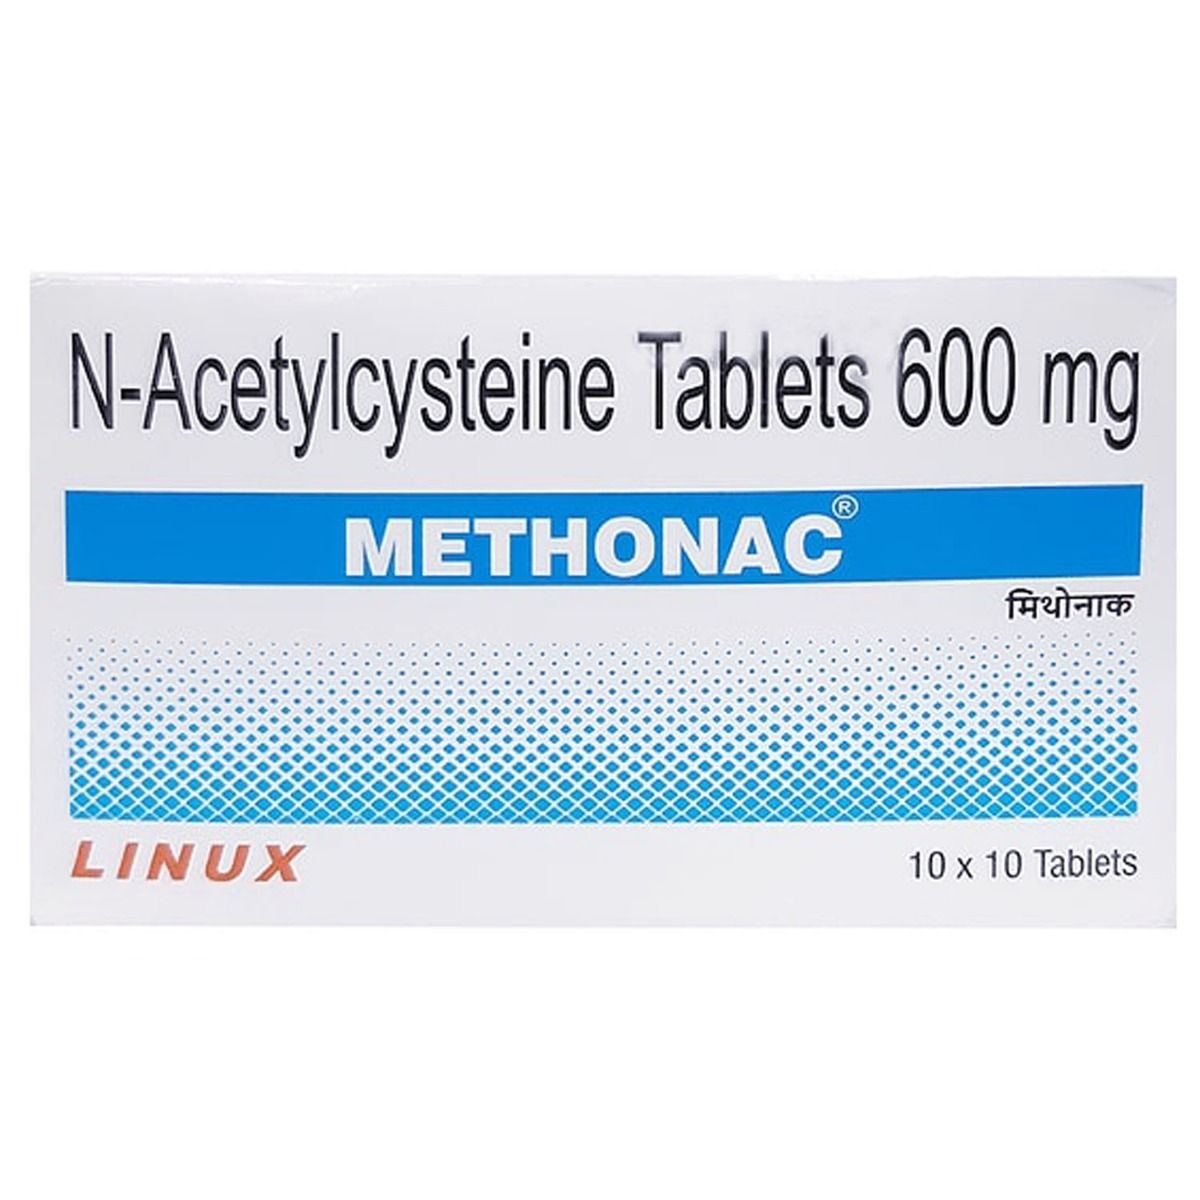 Methonac Tablet 25's Price, Uses, Side Effects, Composition ...